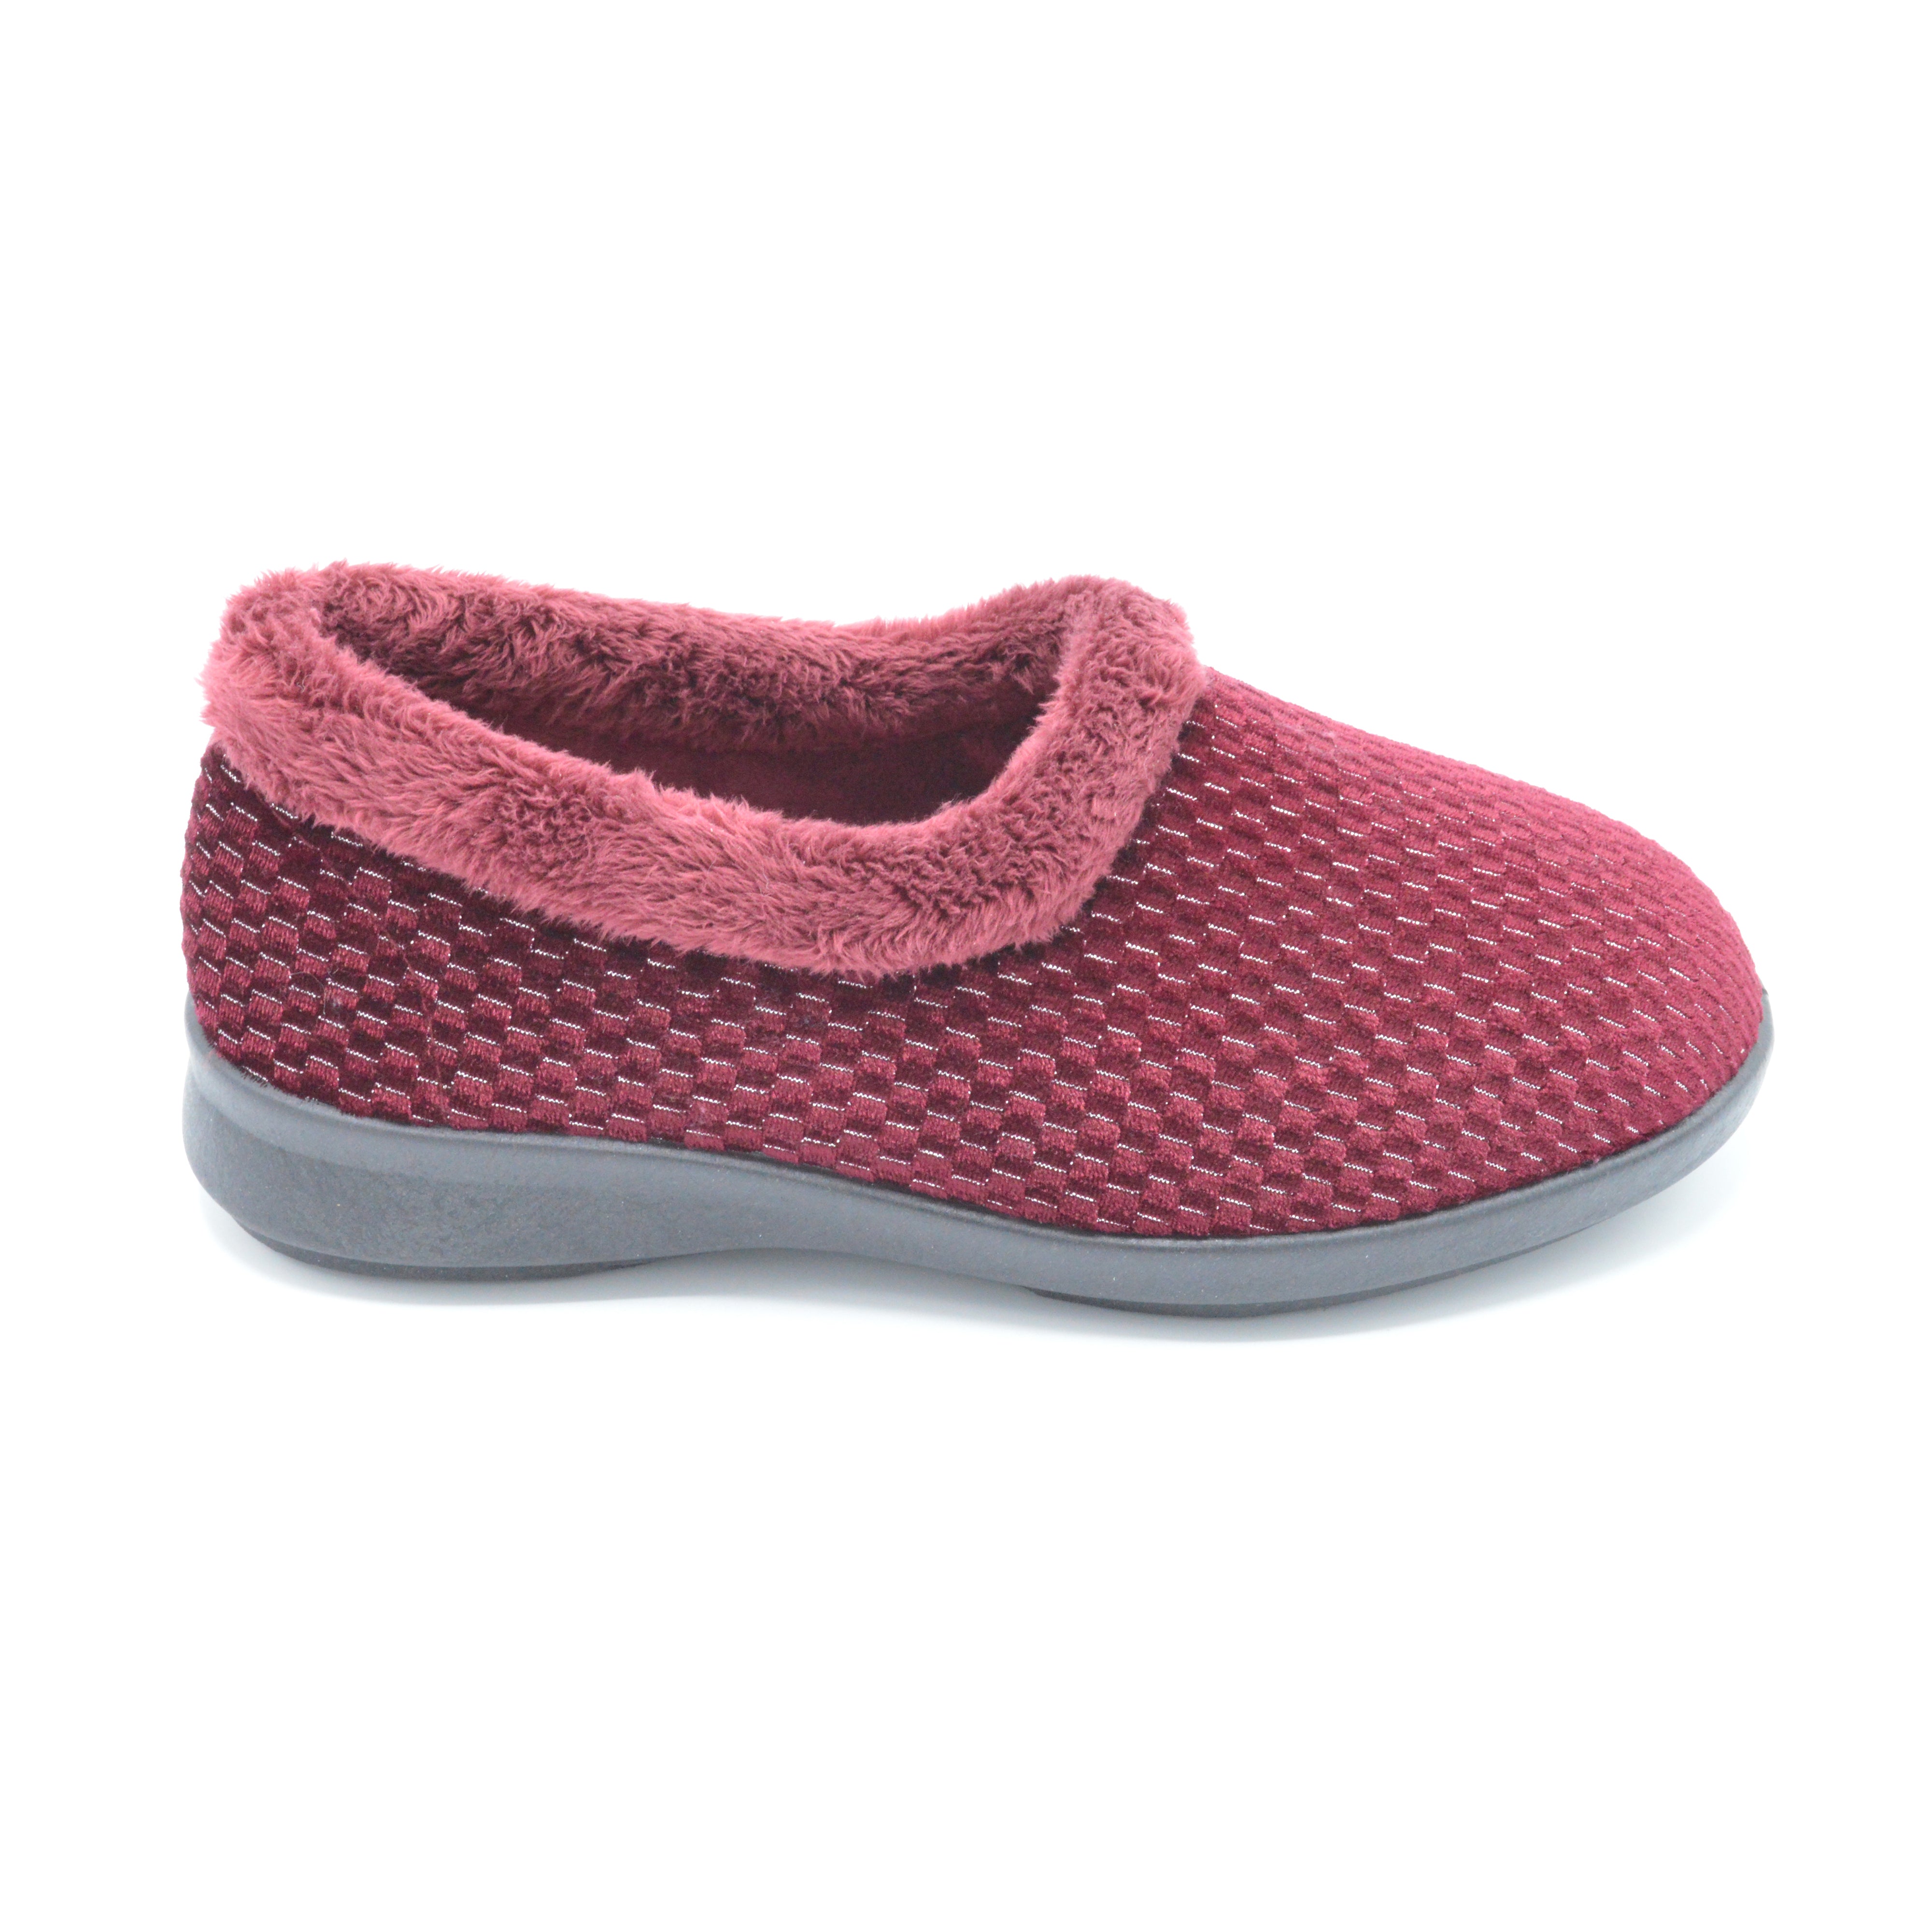 DB Betsy - Ladies Extra Wide Slipper - Burgundy 6E Fit — Wide Shoes